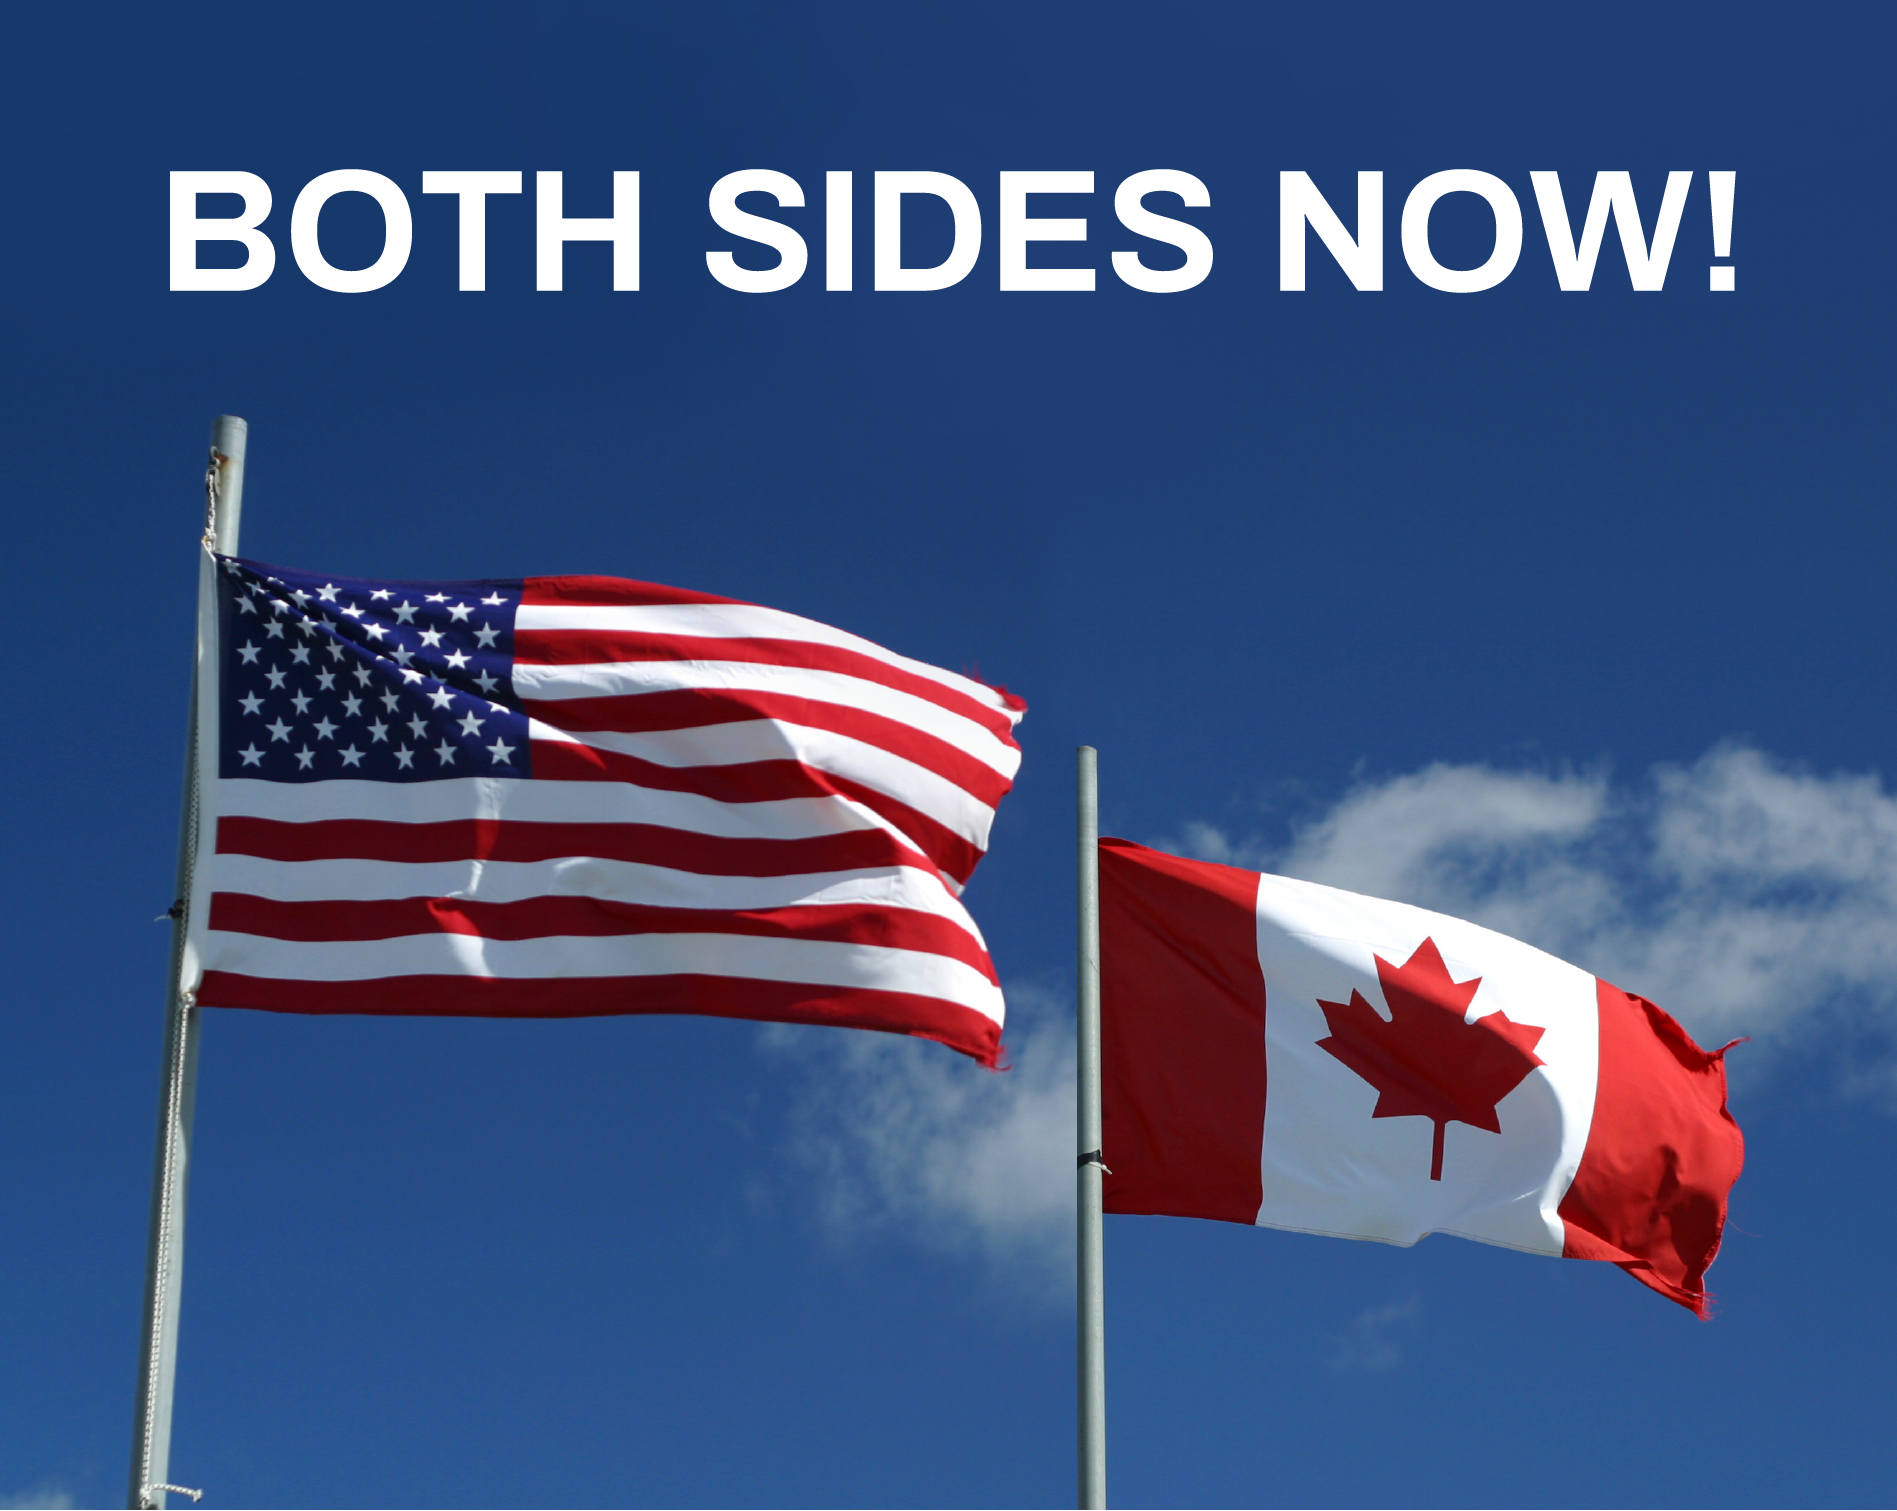 US and Canadian Flags